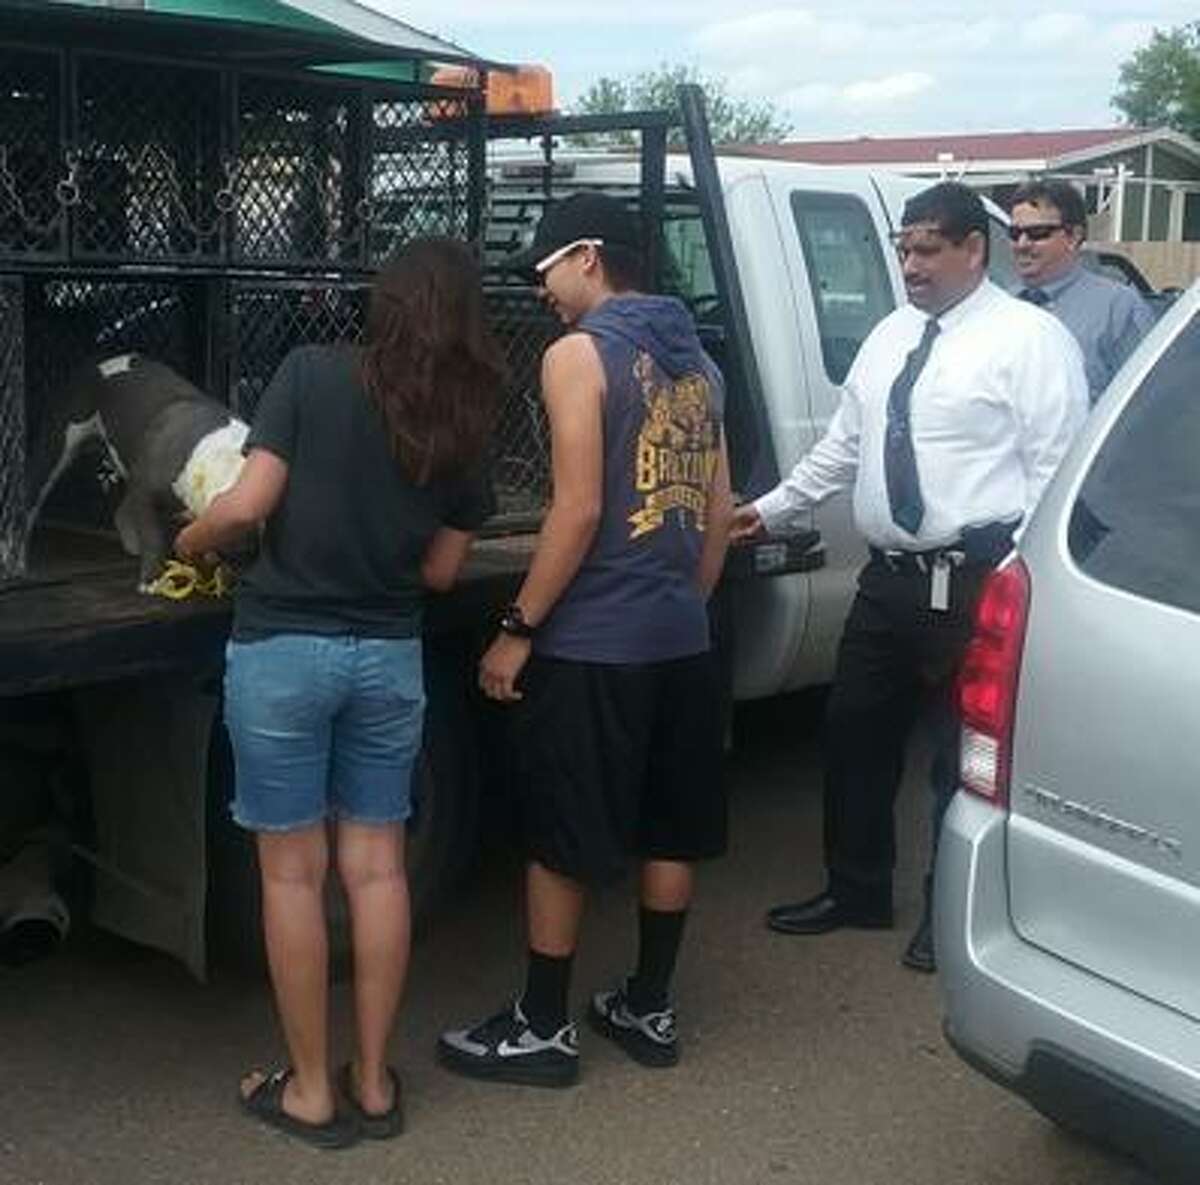 Laredo police said investigators recently recovered an American Bully and returned it to its owners. The dog had been reported stolen last year.